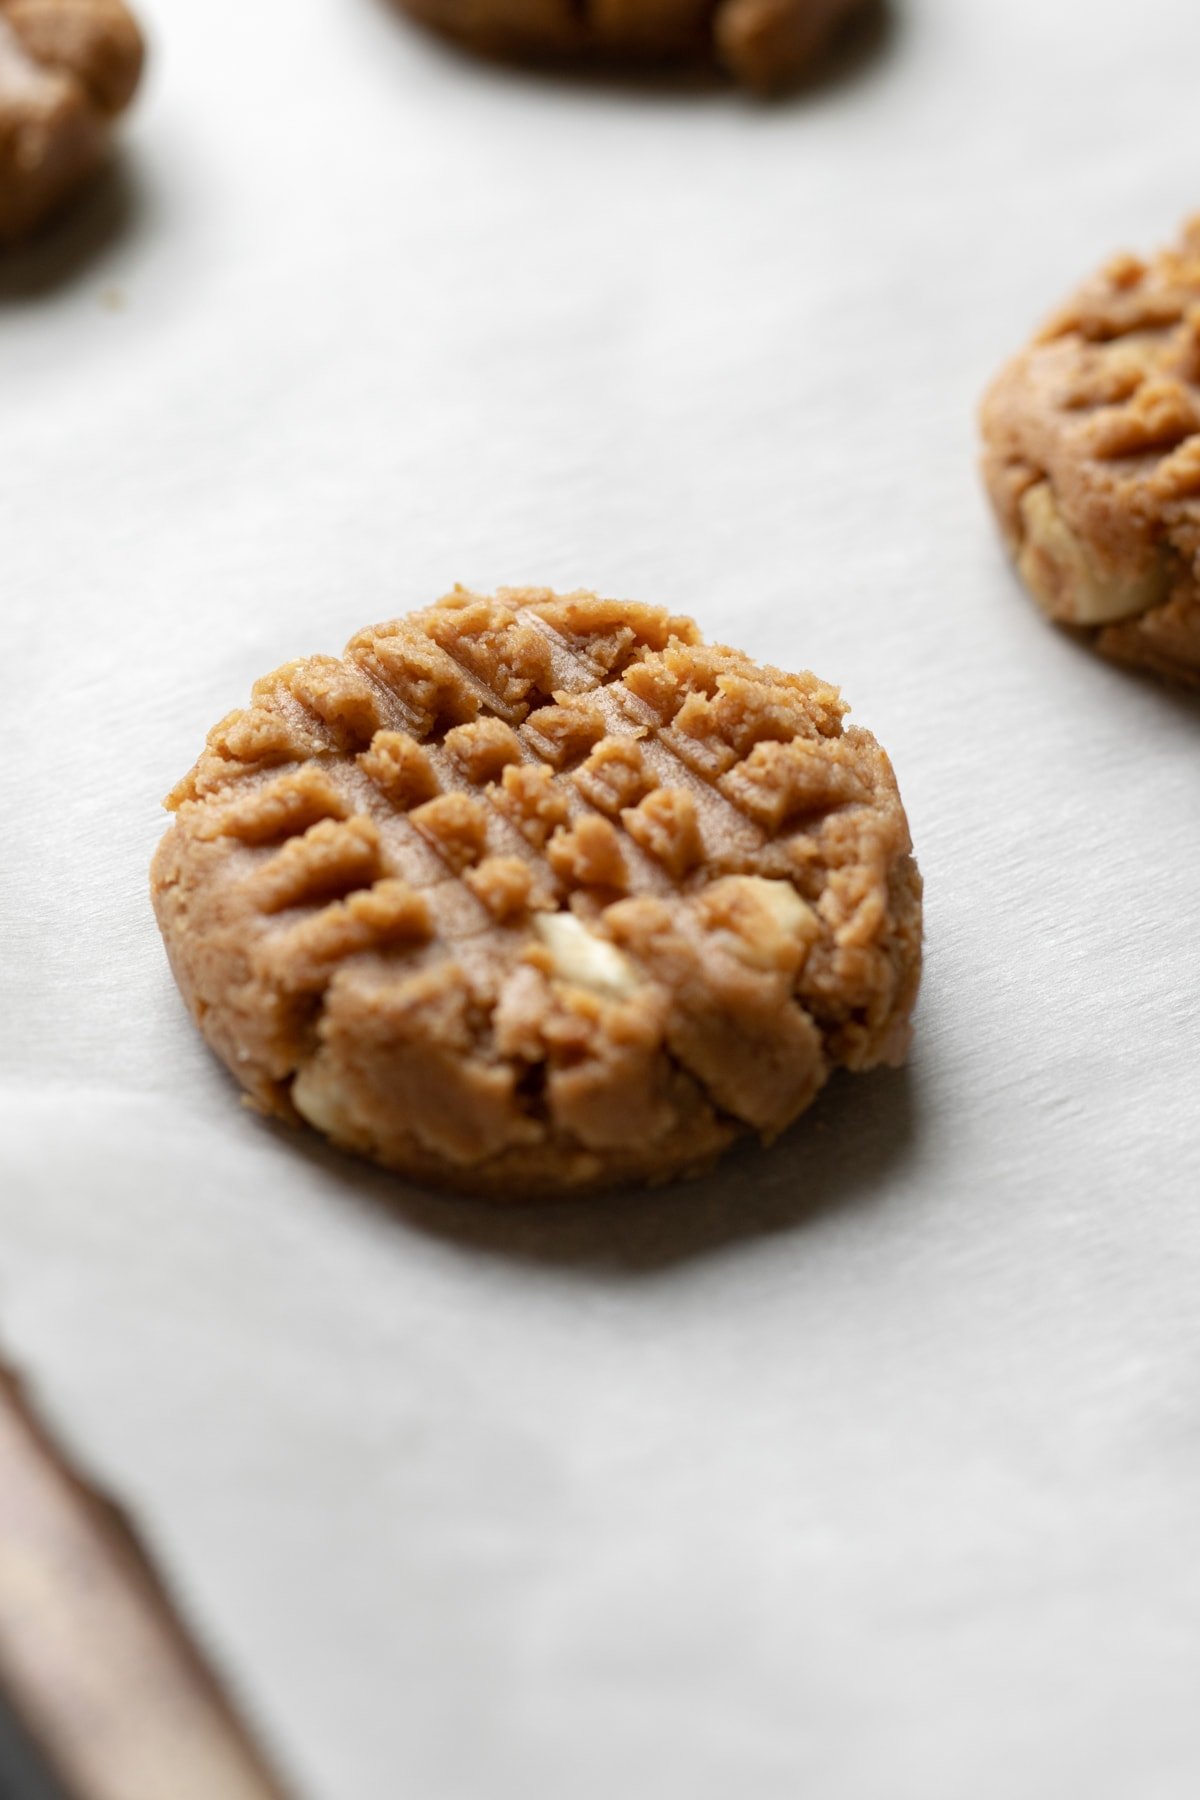 A criss cross pattern created with a fork on top of unbaked cashew cookie dough.